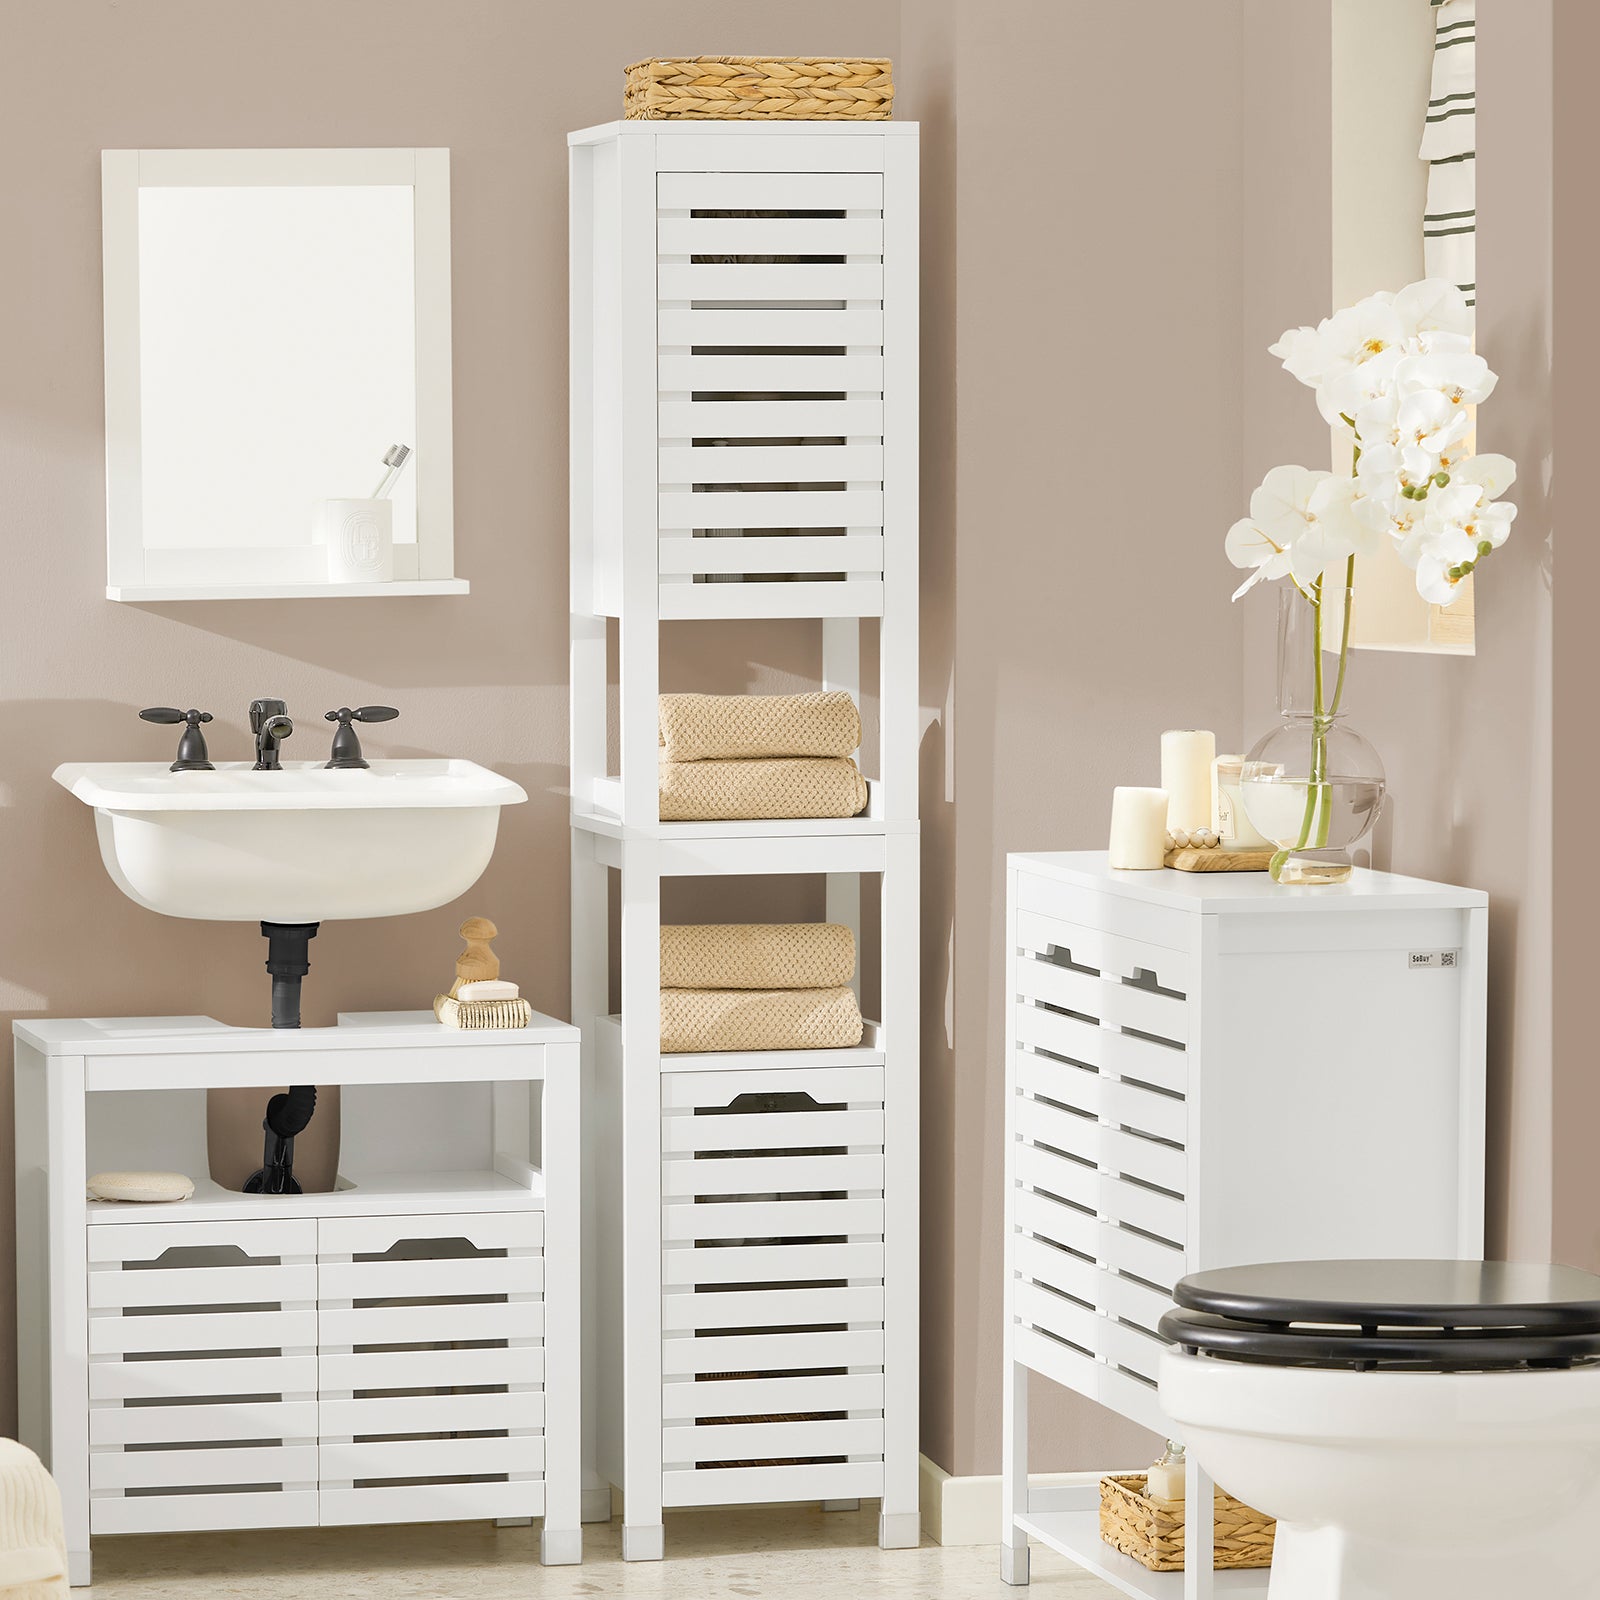 SoBuy BZR59-W,Tall Bathroom Cabinet Cupboard,Storage Cabinet with 2 Slatted Doors and 2 Shelves, H161cm